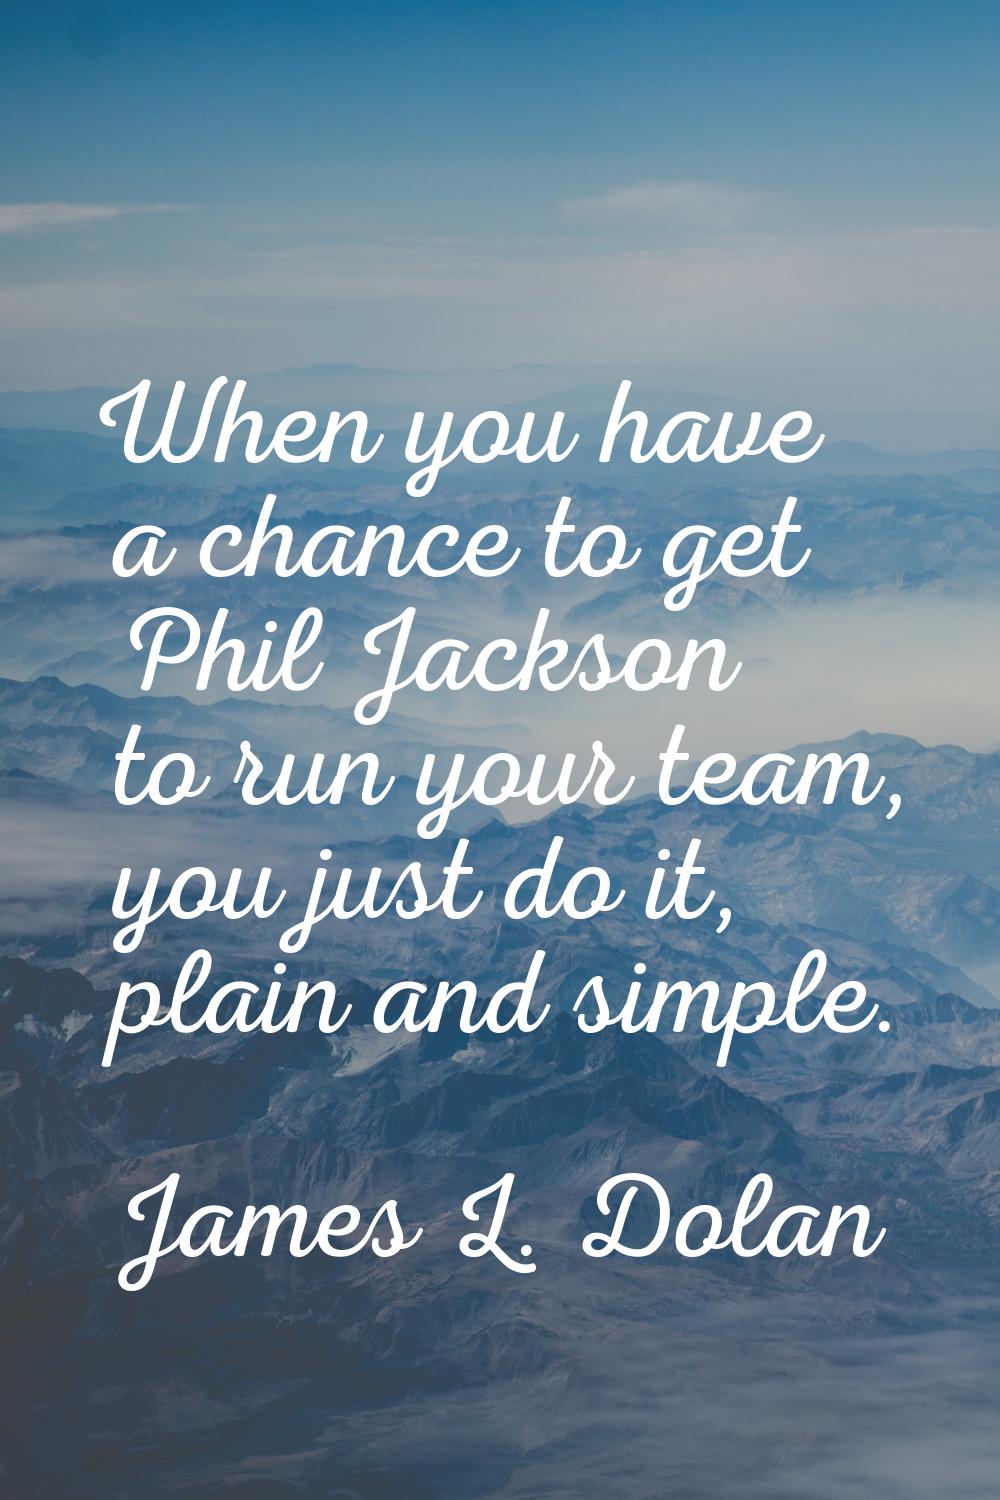 When you have a chance to get Phil Jackson to run your team, you just do it, plain and simple.